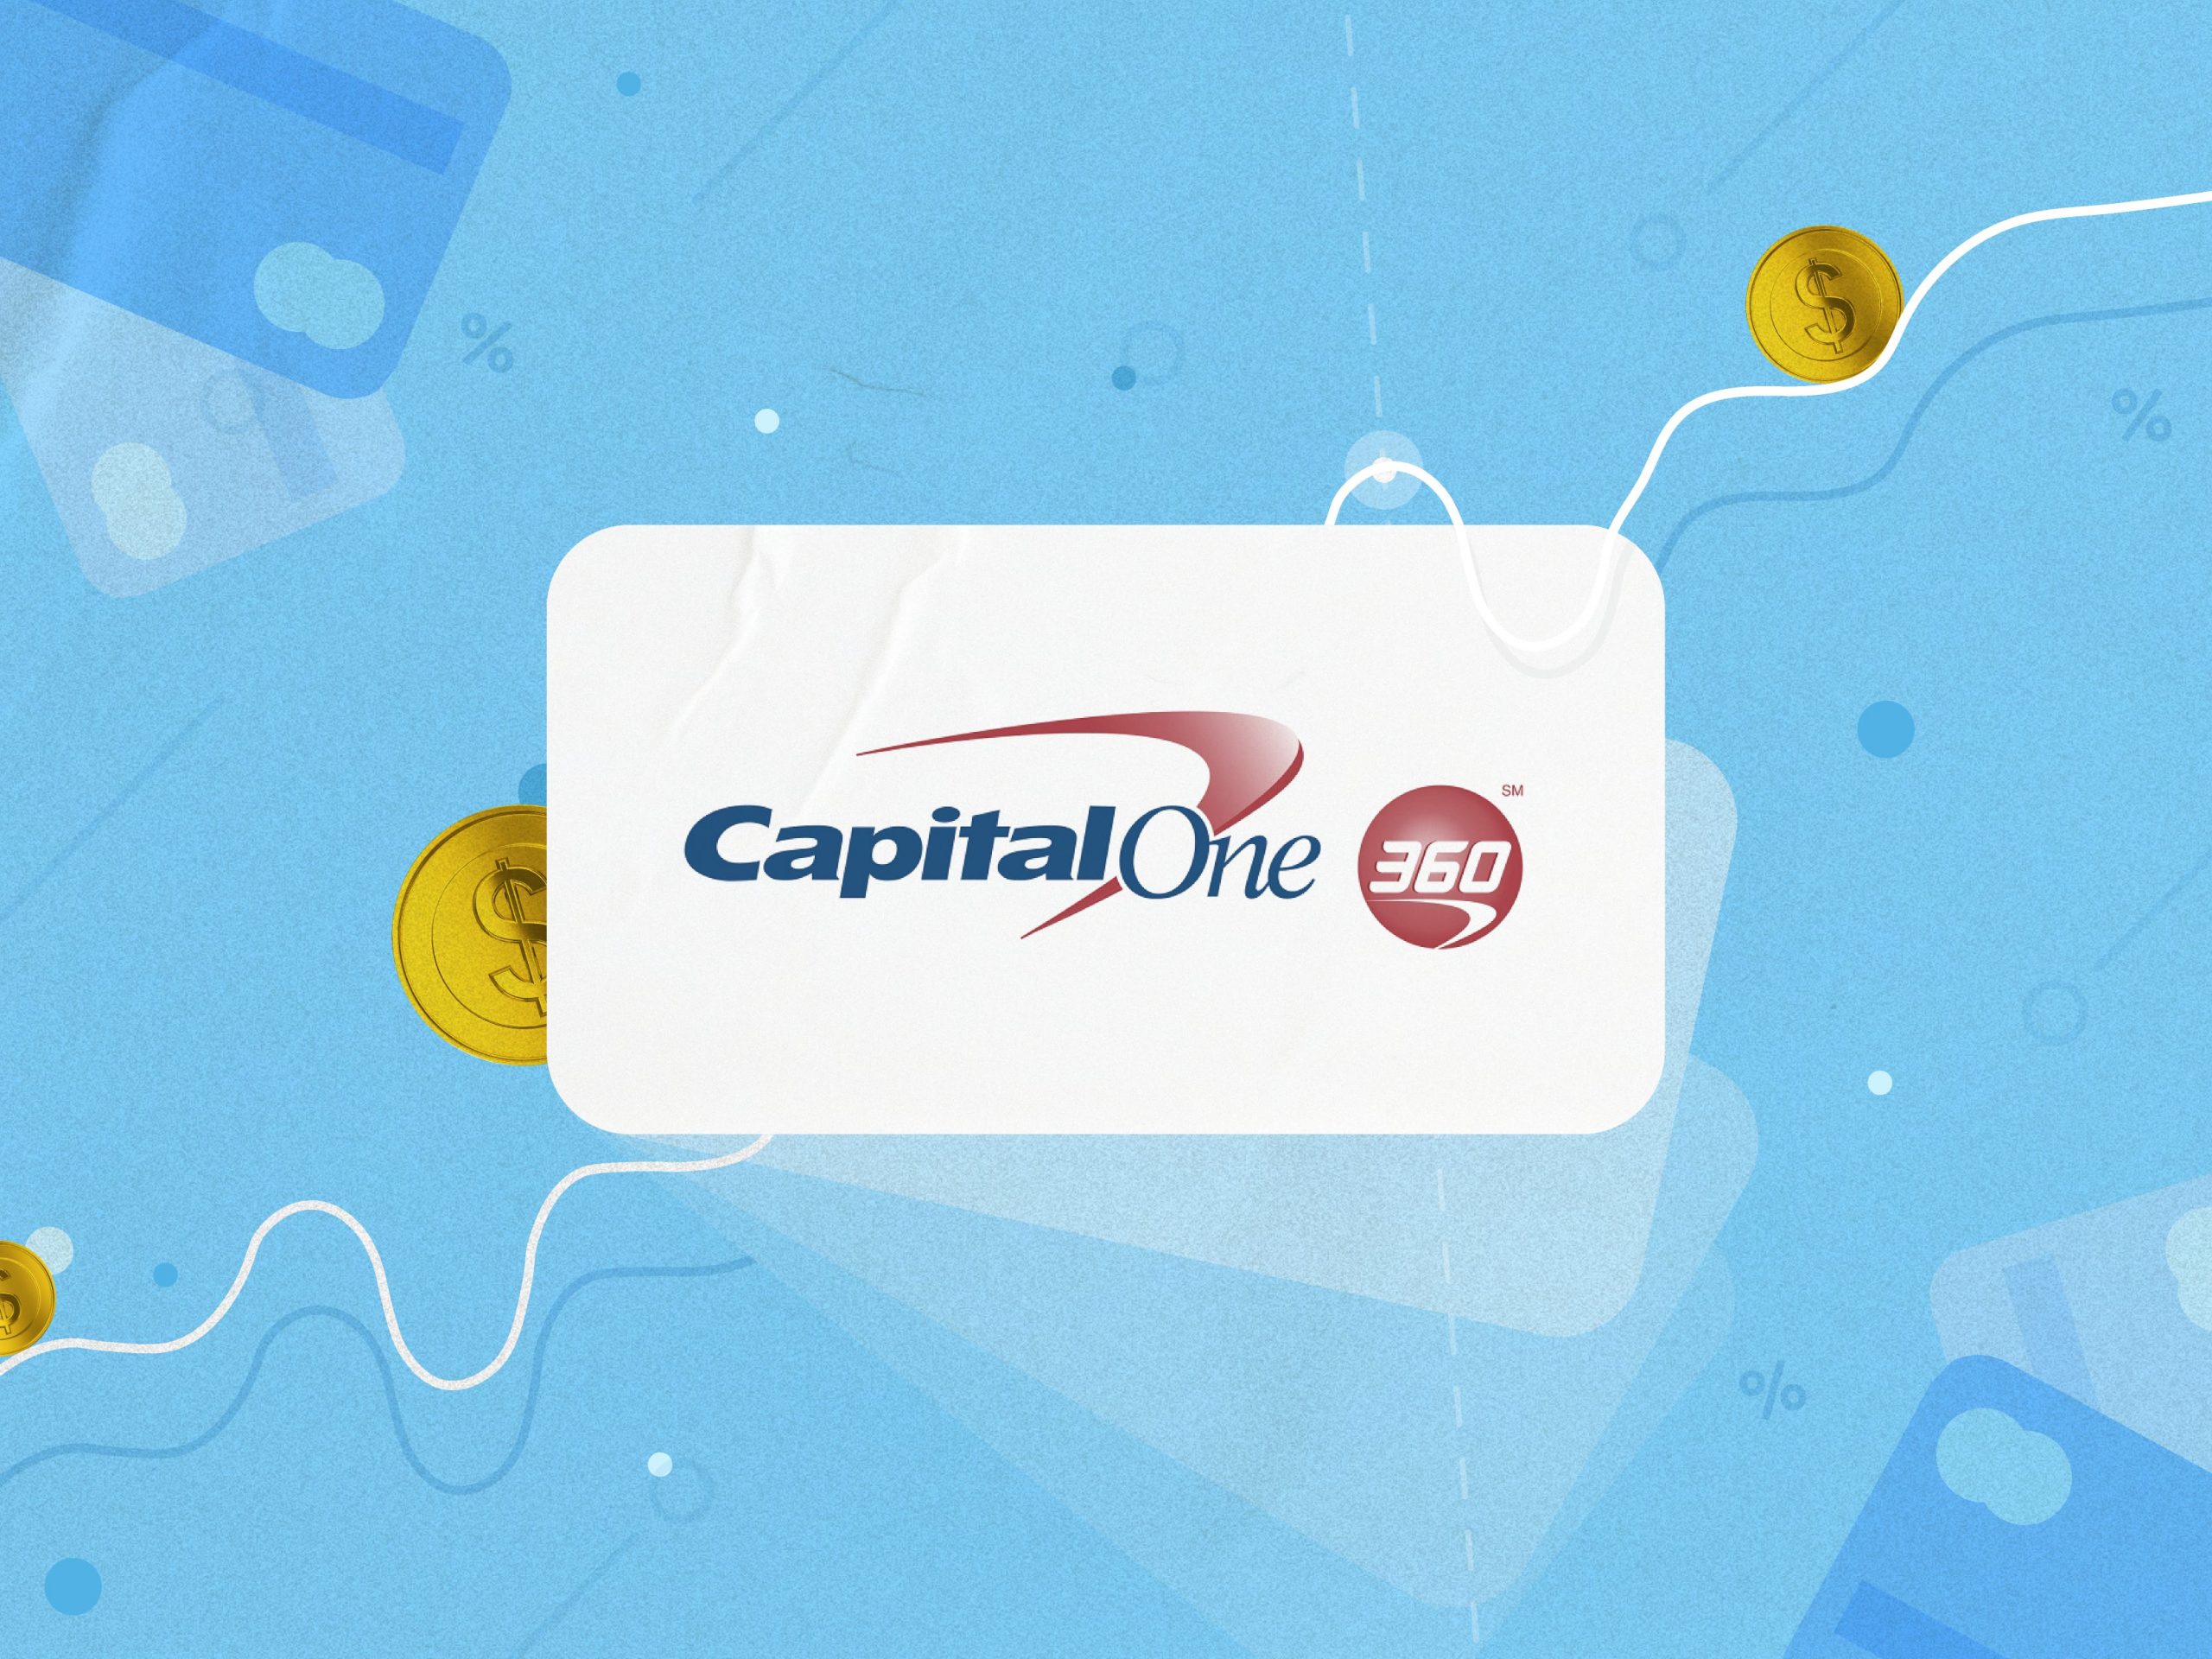 Capital One 360 bank review 4x3